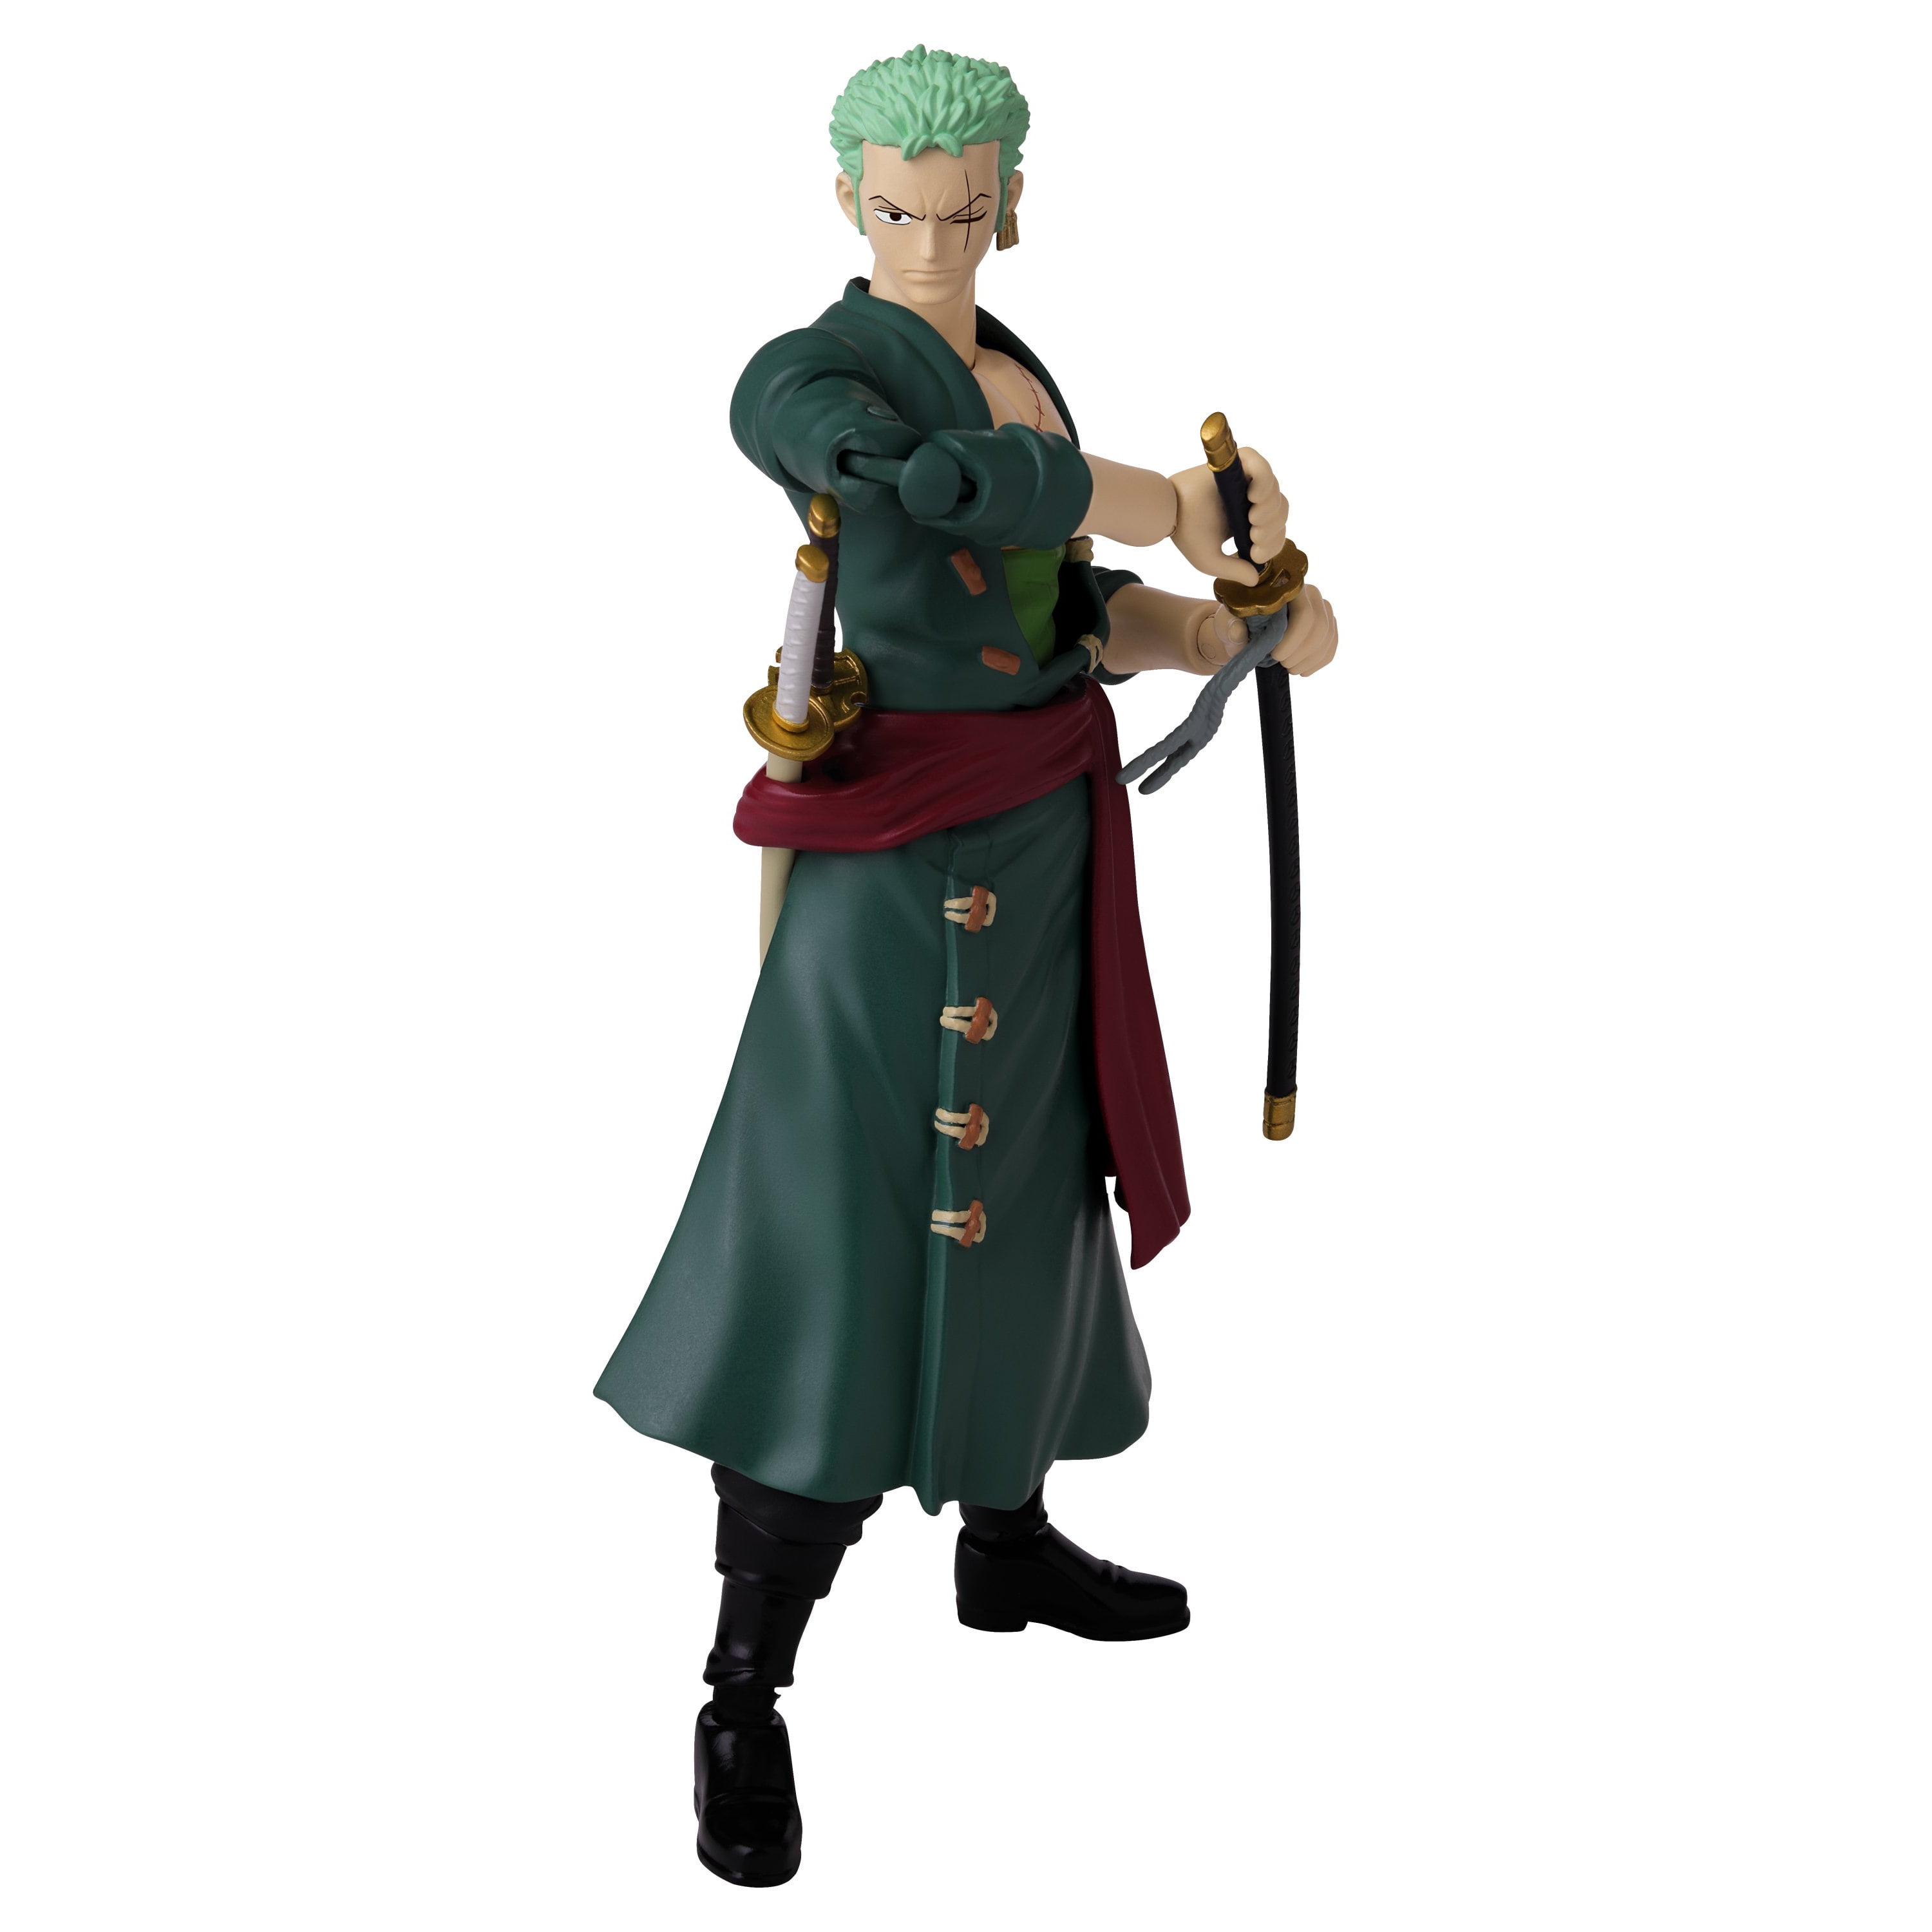 Zoro for $20!!! Unboxing One Piece Anime Heroes Action Figure in 4K 